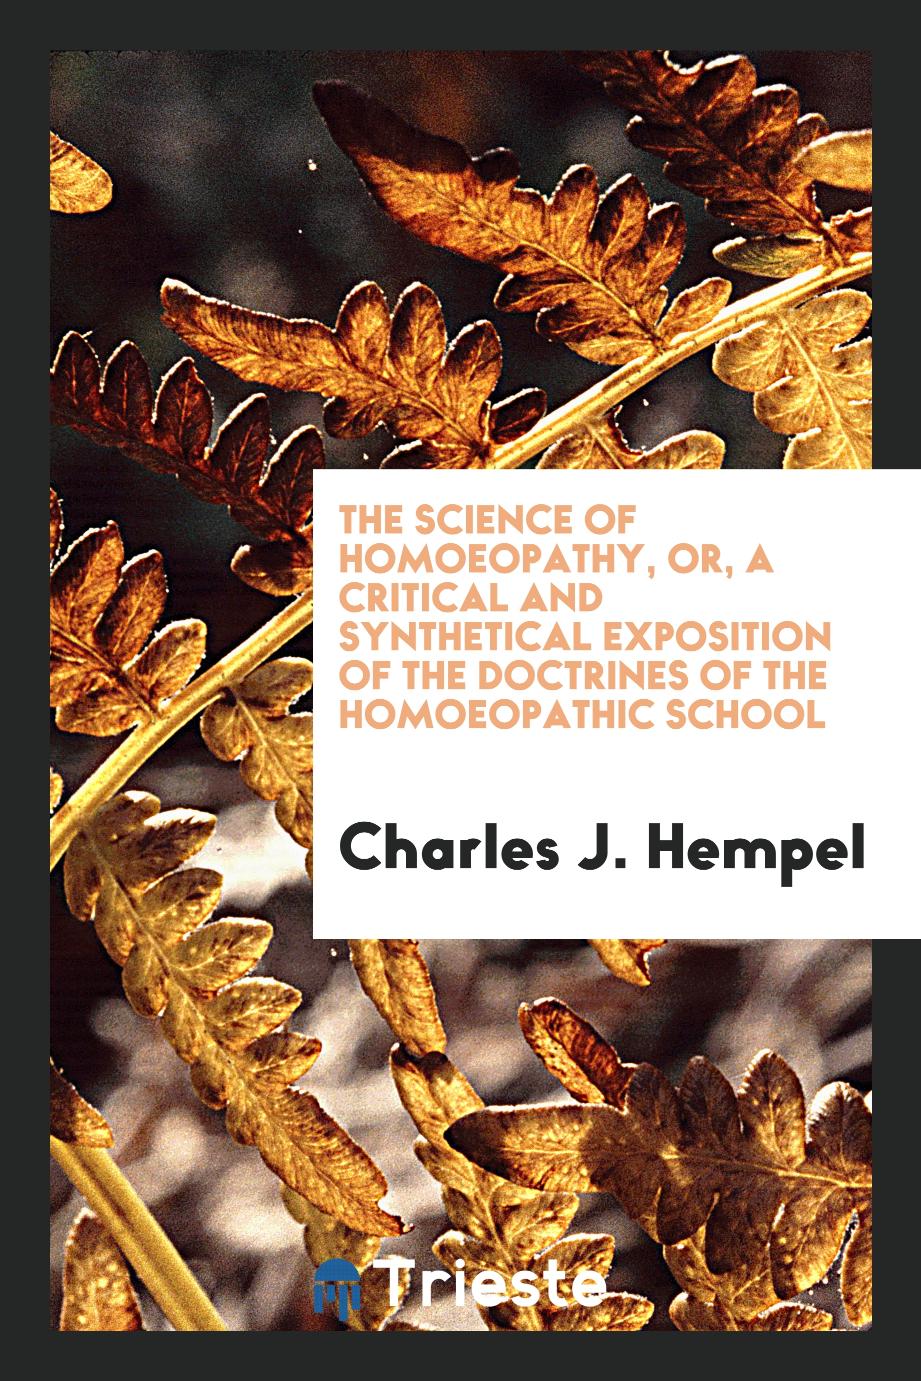 The Science of Homoeopathy, or, a Critical and Synthetical Exposition of the Doctrines of the Homoeopathic School